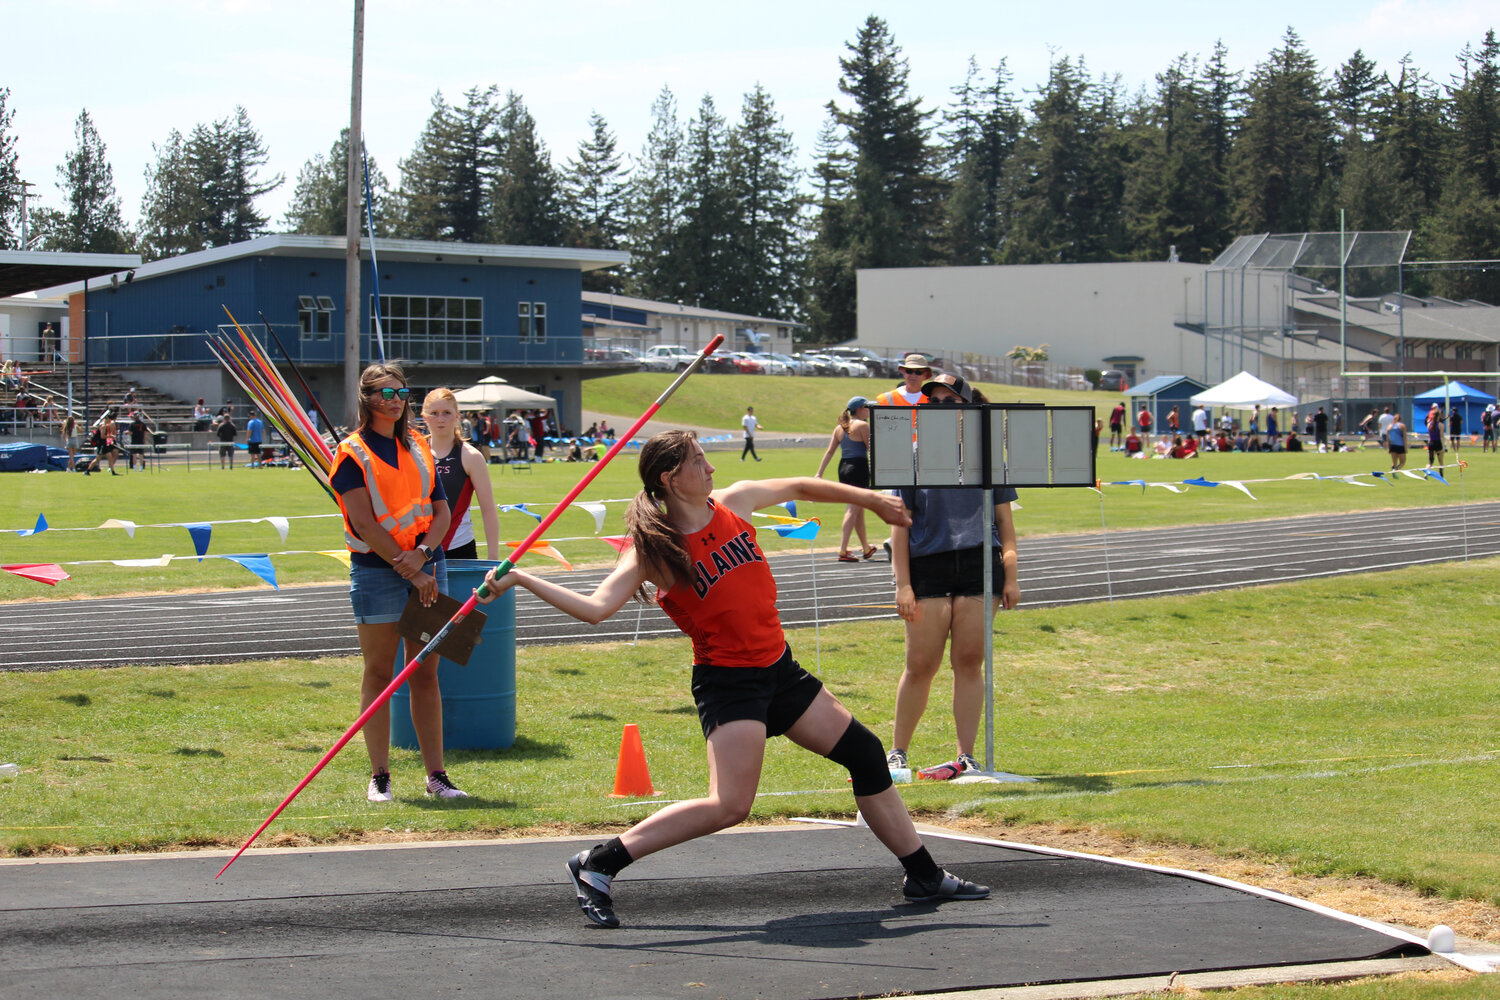 Madeleine Ernst threw a personal record of 107 feet, 9 inches in the javelin to take fifth, just missing state qualification.